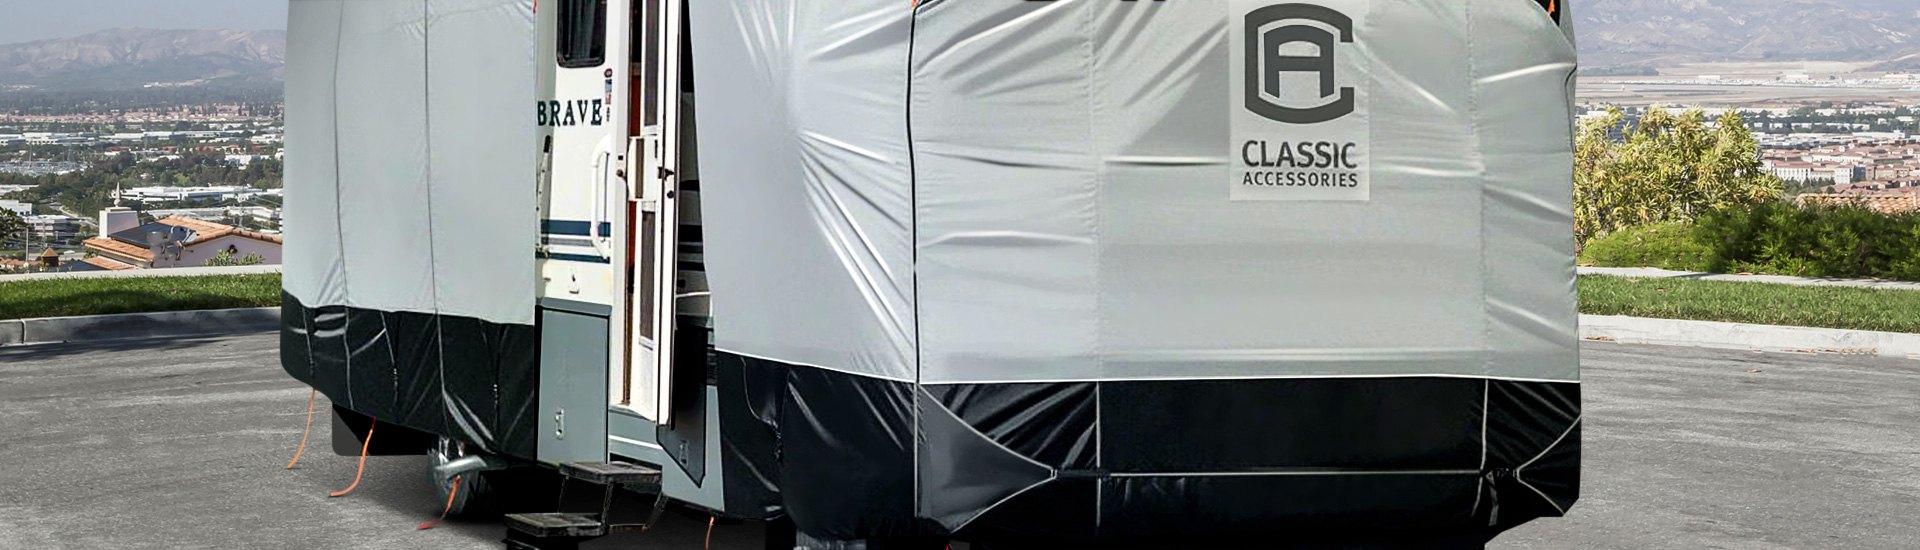 RV Trailer Covers Protect Your Camping Trailer When Not in Use